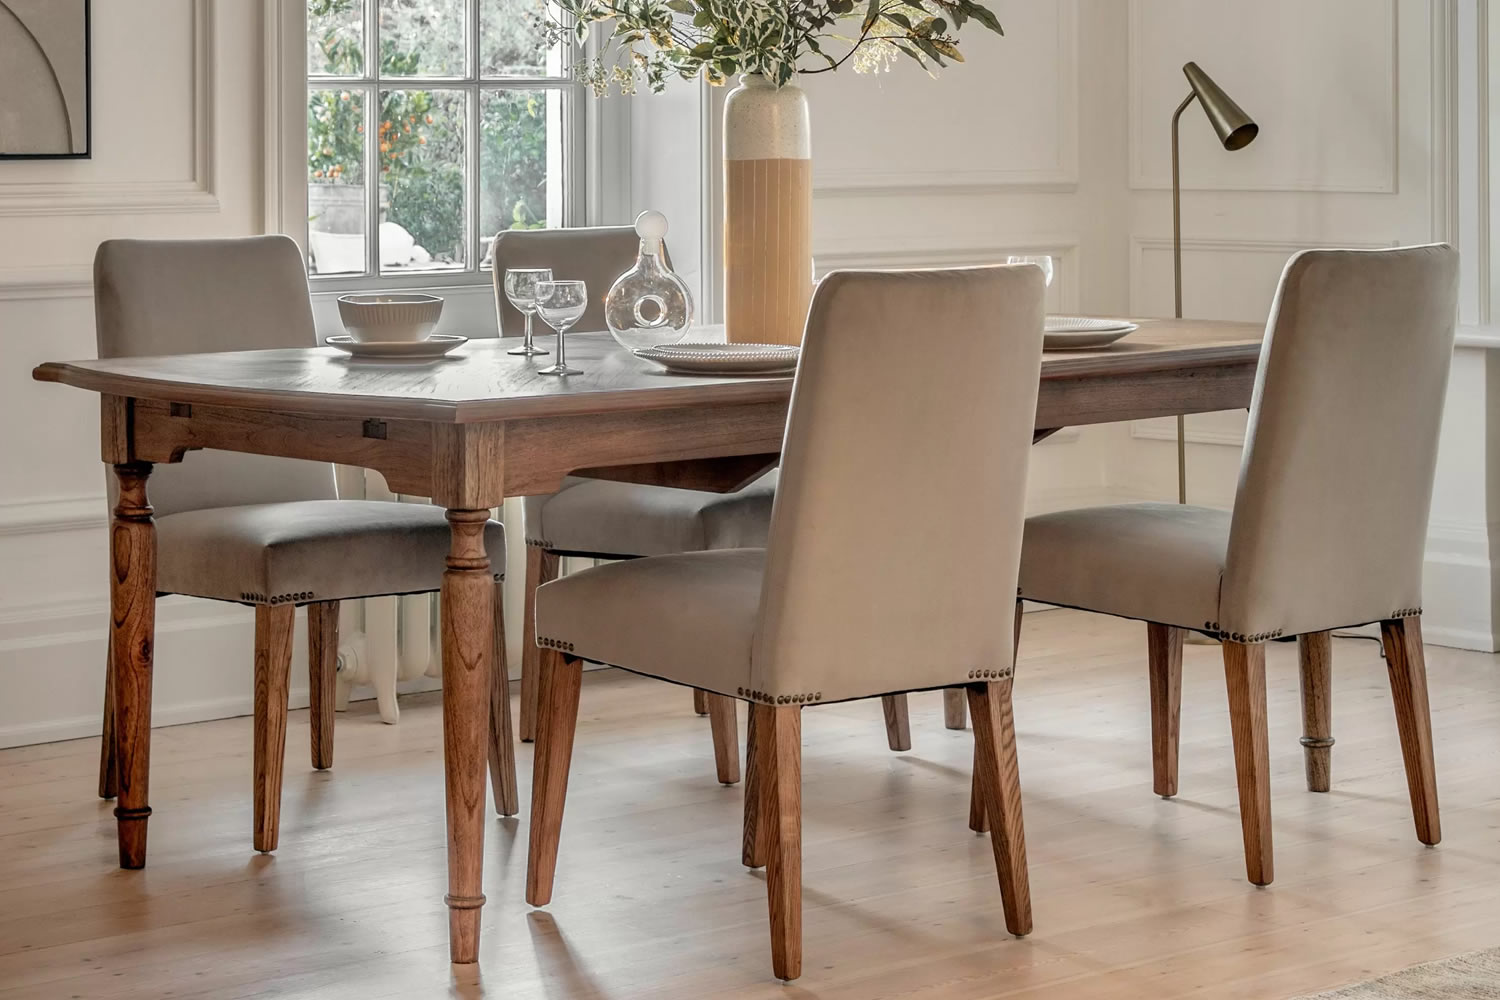 View Highgrove Large Rectangular Extending Dining Table Crafted From Mindi Wood With Intricate Marquetry Detail SpindleTurned Legs Seats 10 People information